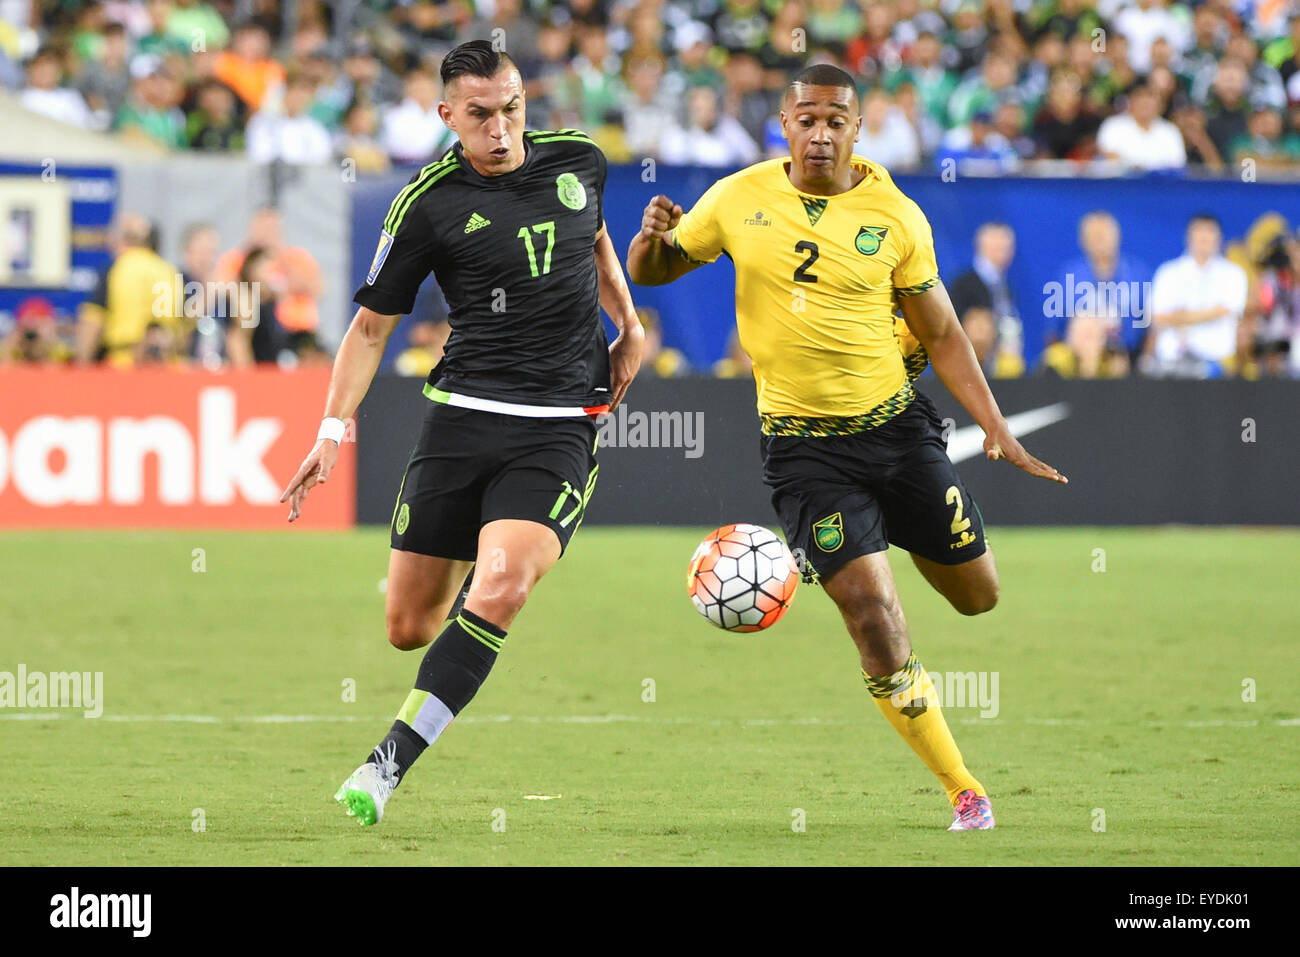 Philadelphia, Pennsylvania, USA. 26th July, 2015. Mexico midfielder Jorge Torres Nilo #17 and Jamaica midfielder Christopher Humphrey #2 chase after a loose ball during the 2015 CONCACAF Gold Cup final between Jamaica and Mexico at Lincoln Financial Field in Philadelphia, Pennsylvania. Mexico defeated Jamaica 3-1. Rich Barnes/CSM/Alamy Live News Stock Photo